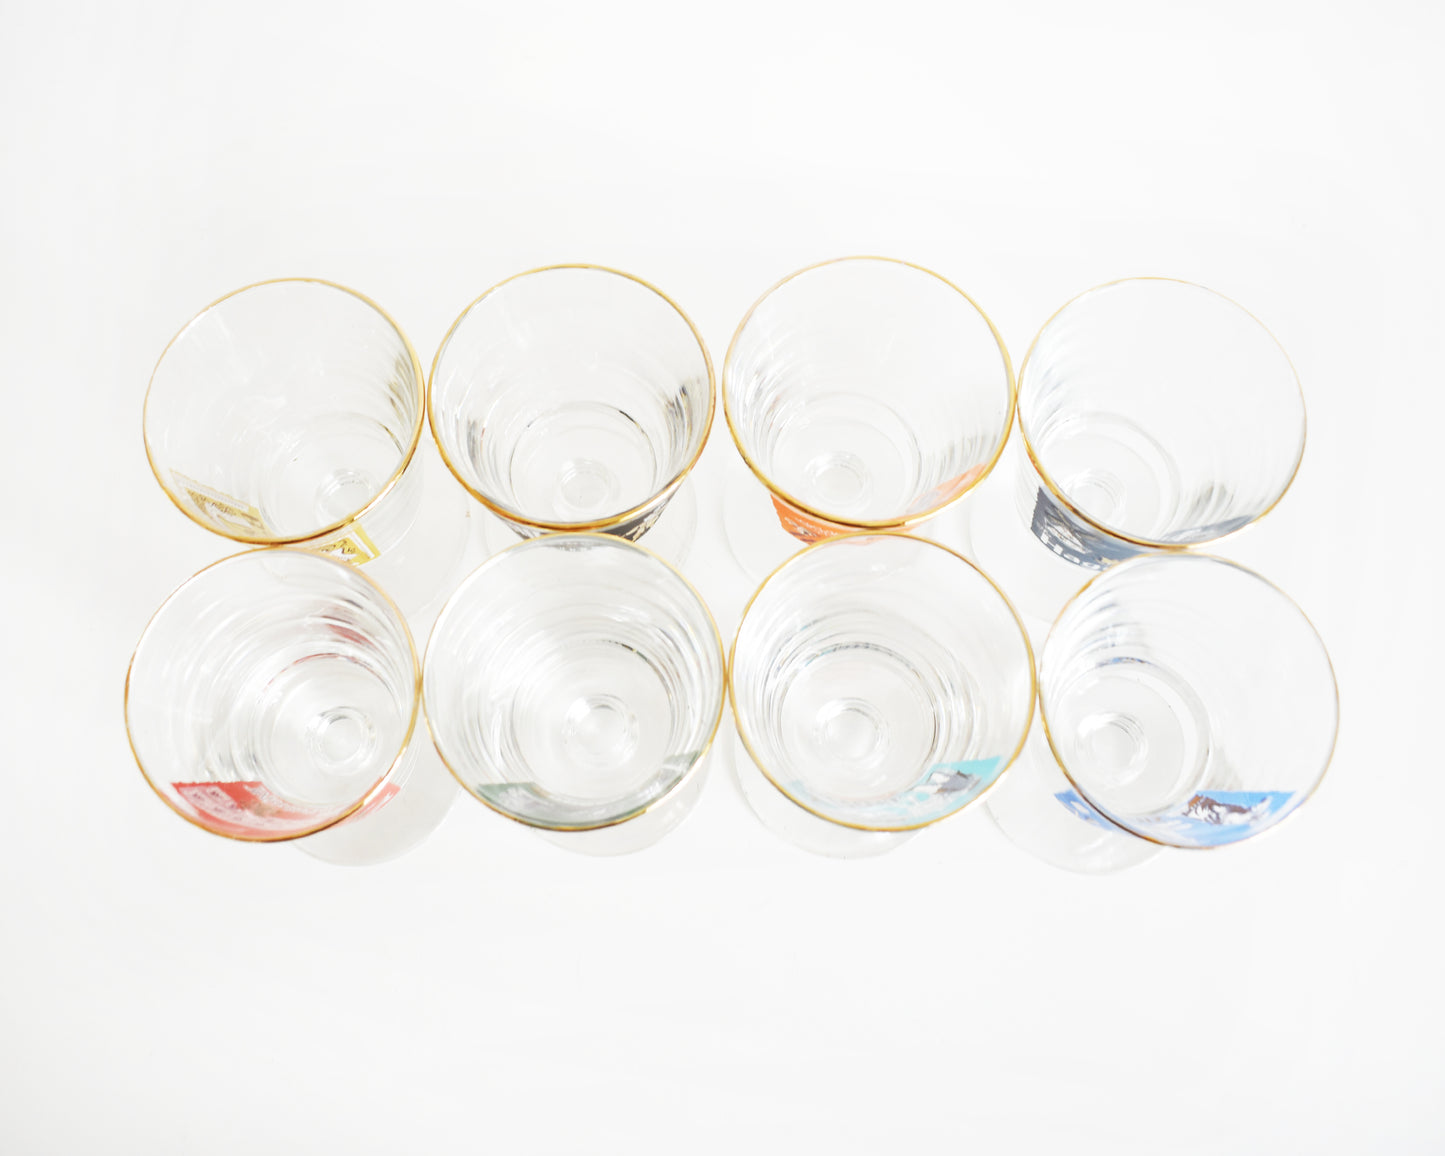 Over head shot of the glasses which show their gold rims on top